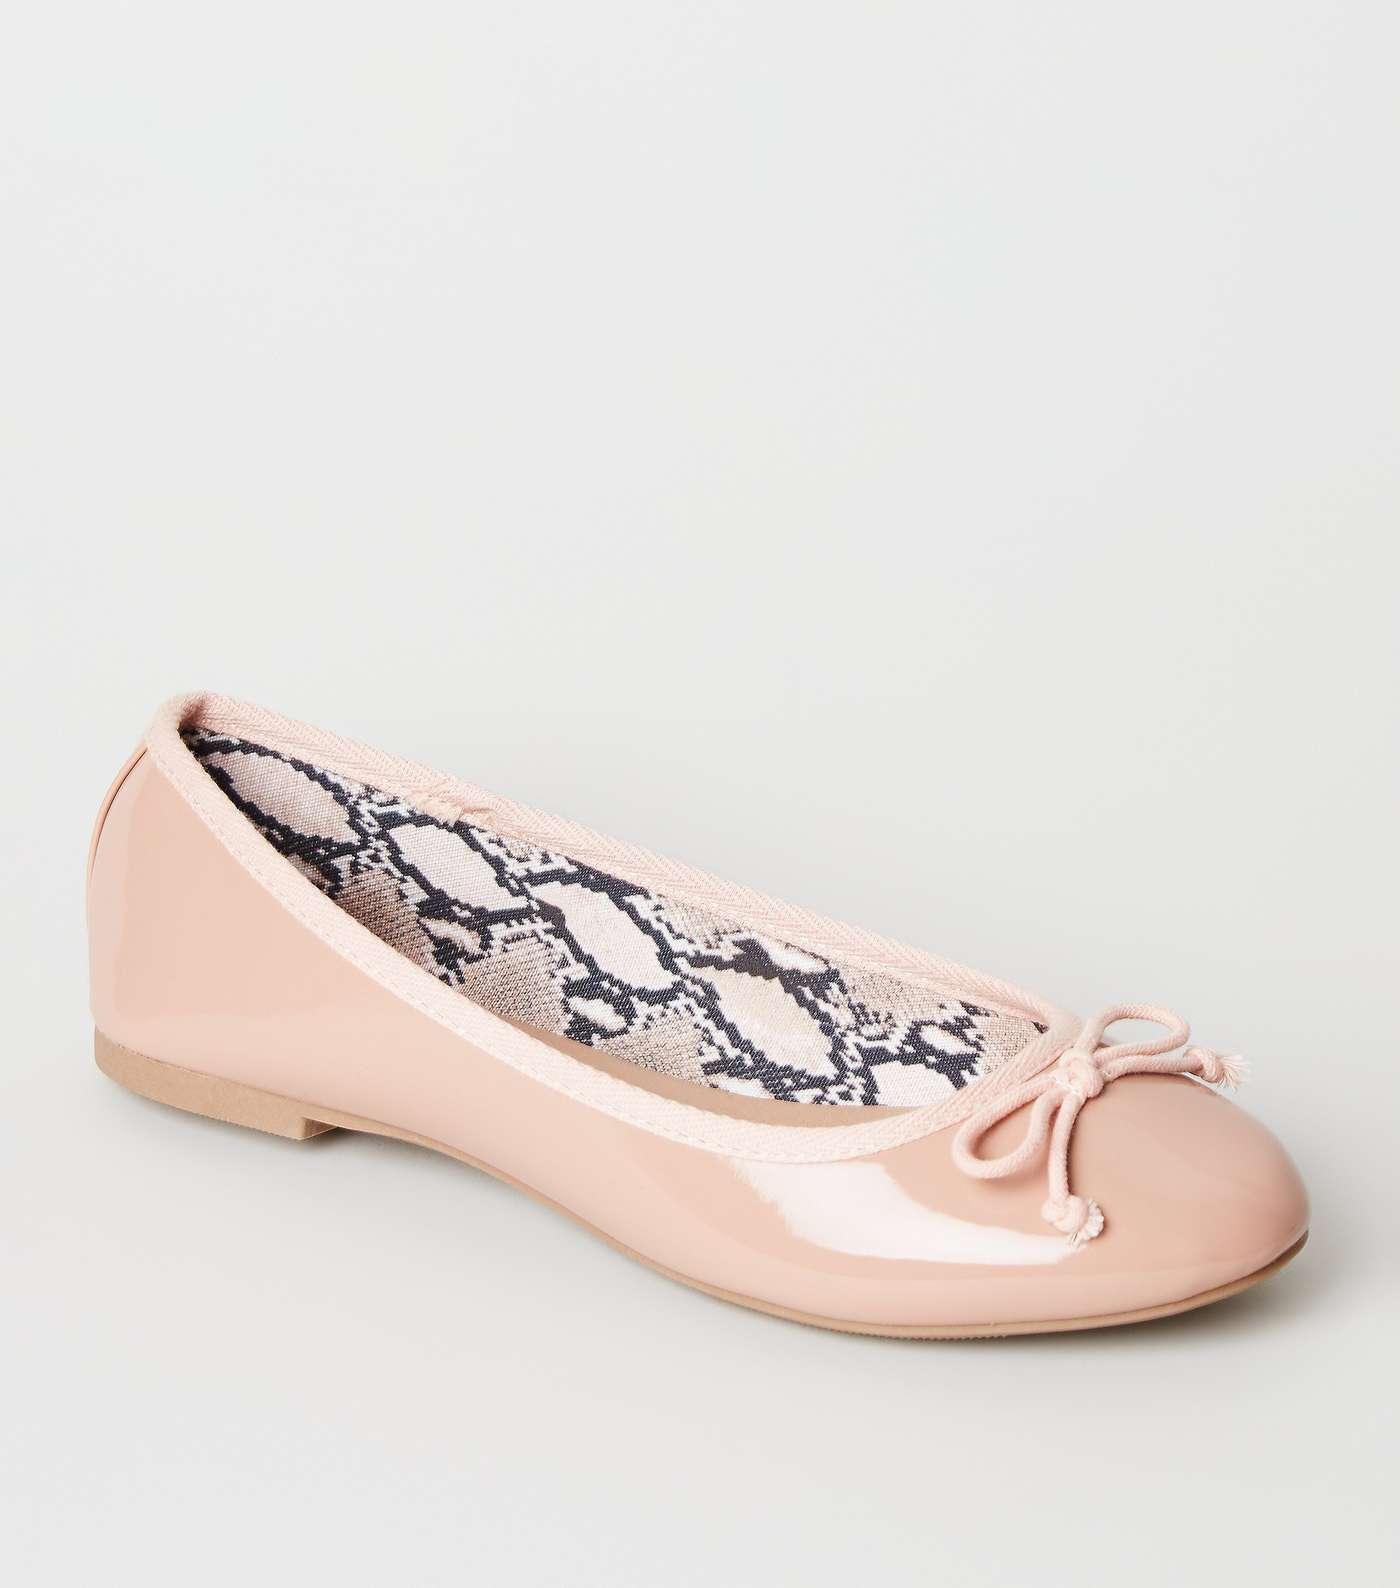 Nude Patent Snake Print Lined Ballet Pumps